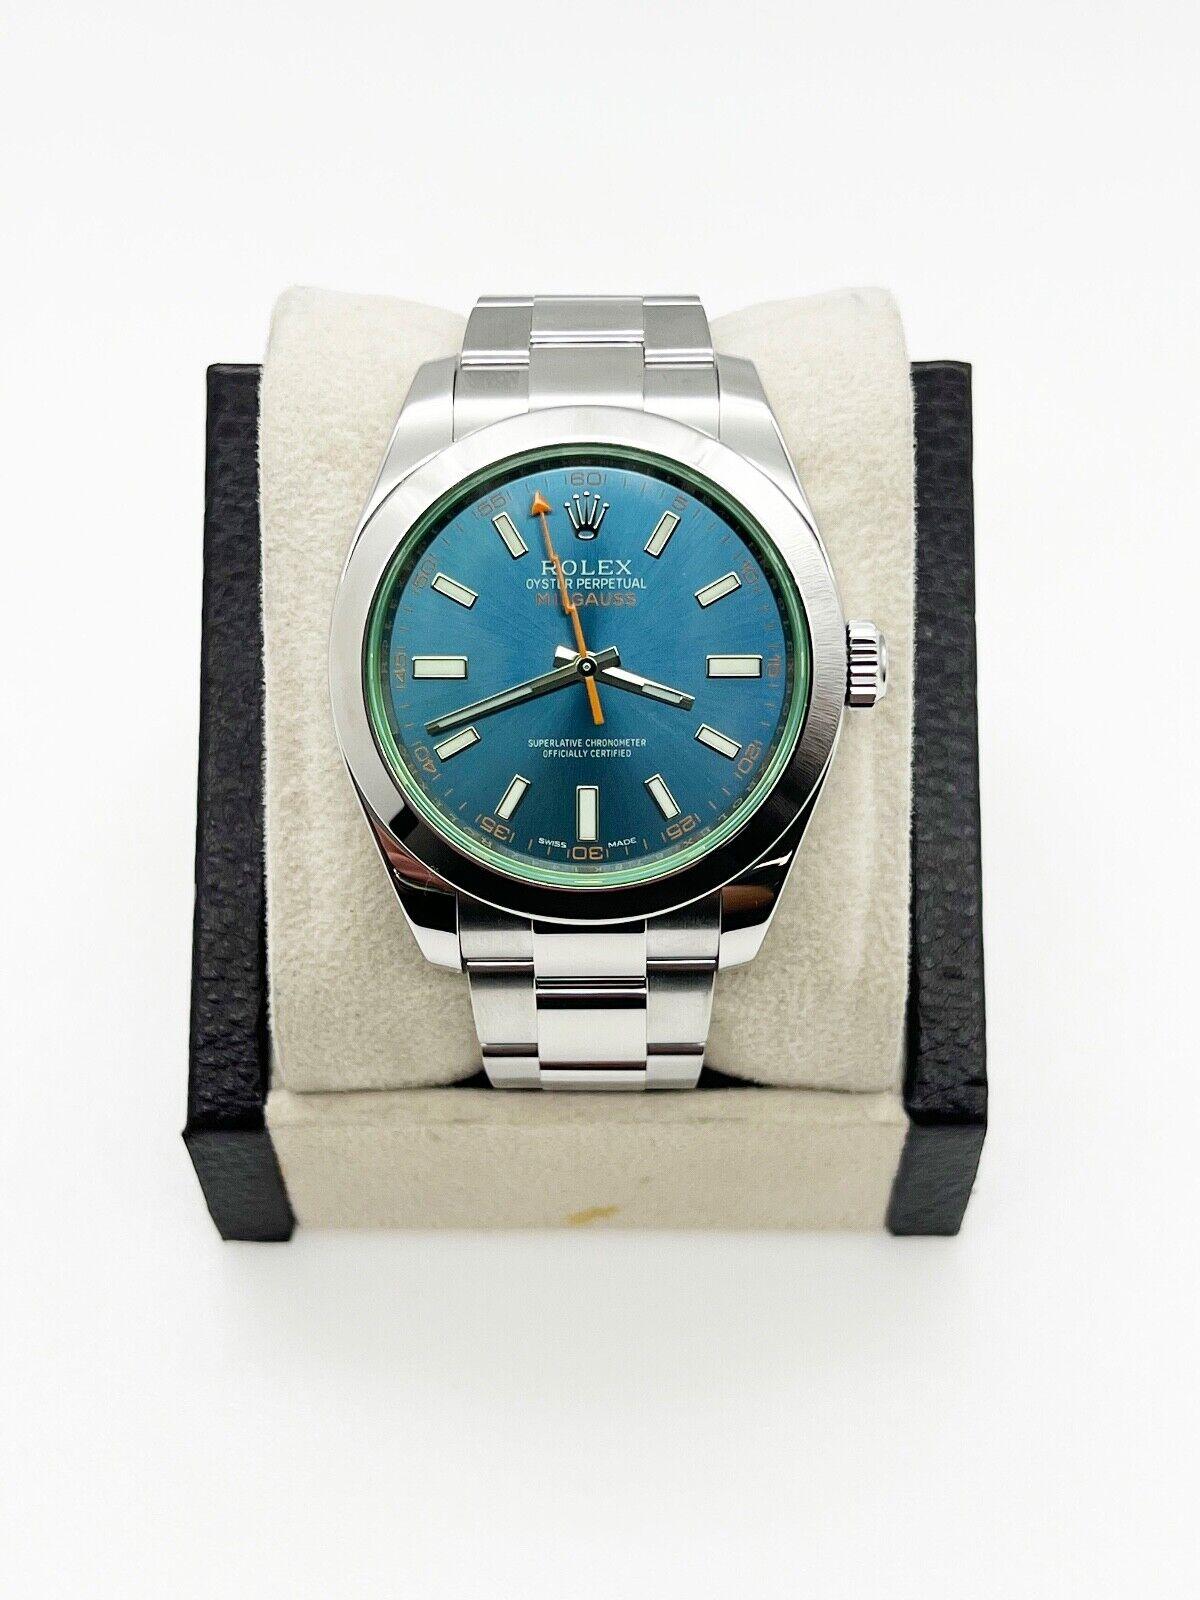 Style Number: 116400GV

Serial: 878K1***

Year: 2015

Model: Milgauss

Case Material: Stainless Steel

Band: Stainless Steel

Bezel: Stainless Steel

Dial: Blue

Face: Green Sapphire Crystal

Case Size: 40mm

Includes: 

-Rolex Box &